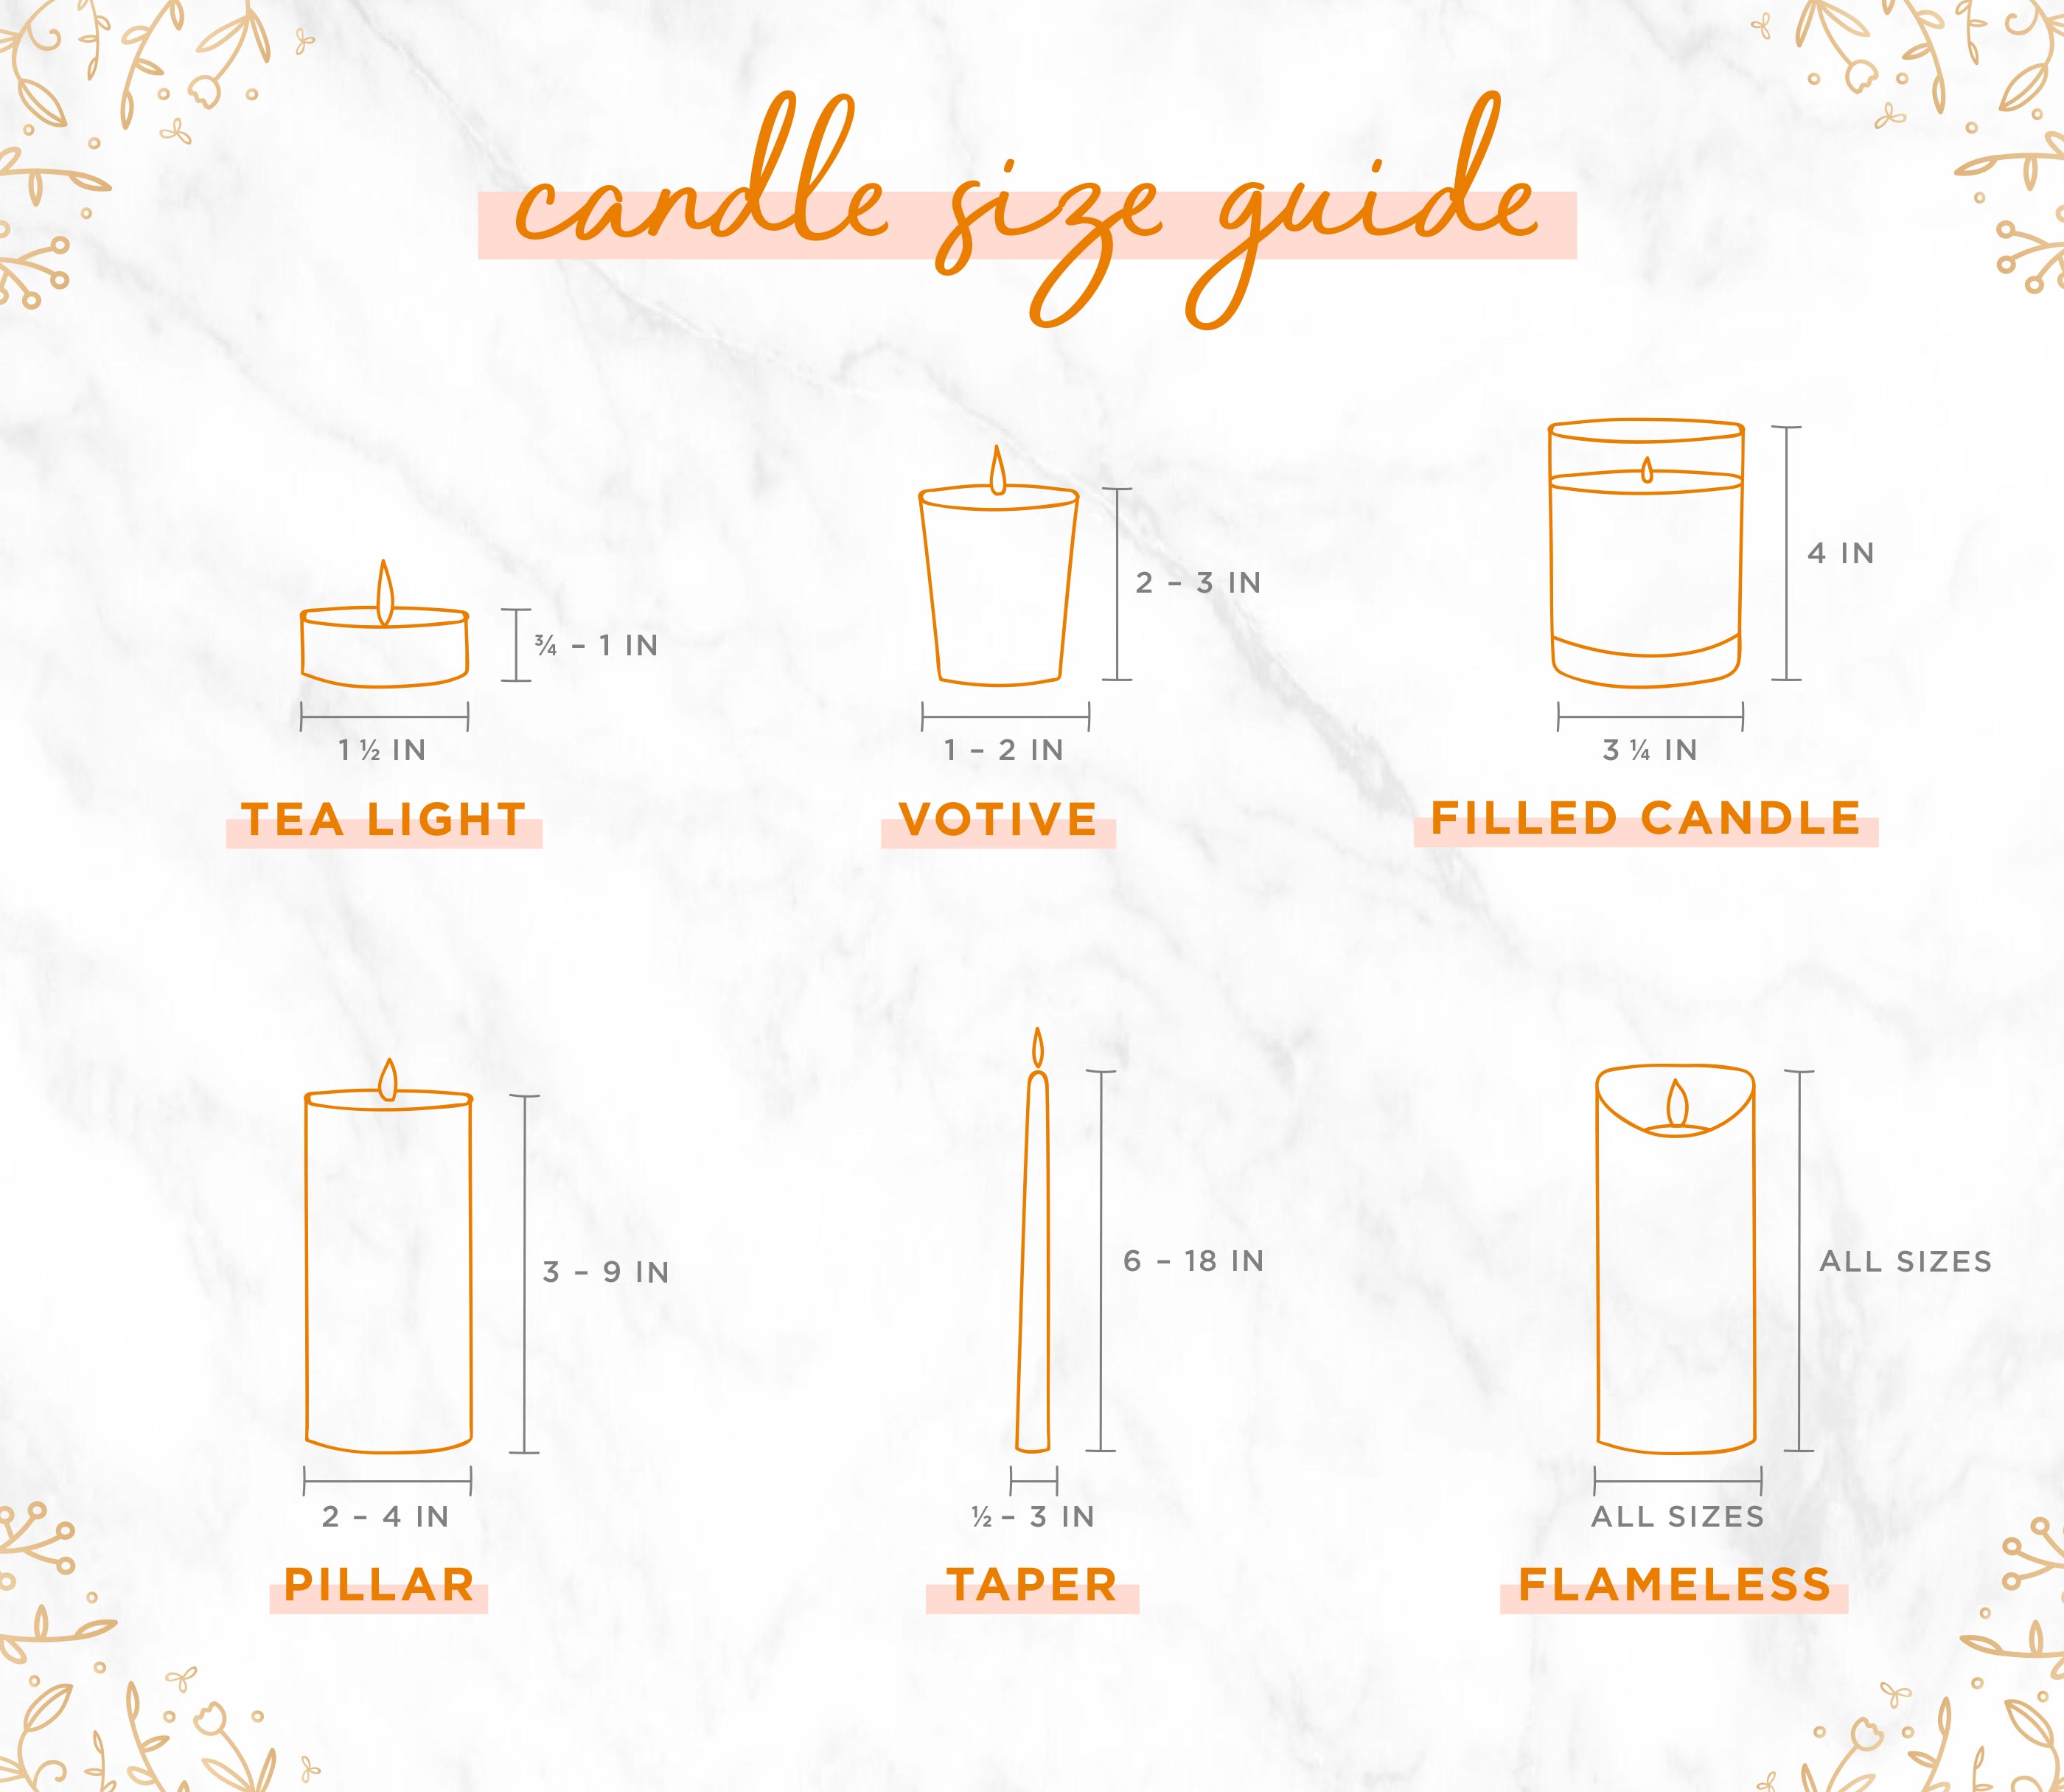 Candle Sizes Which Is The Right One For Your Space? Ideas and